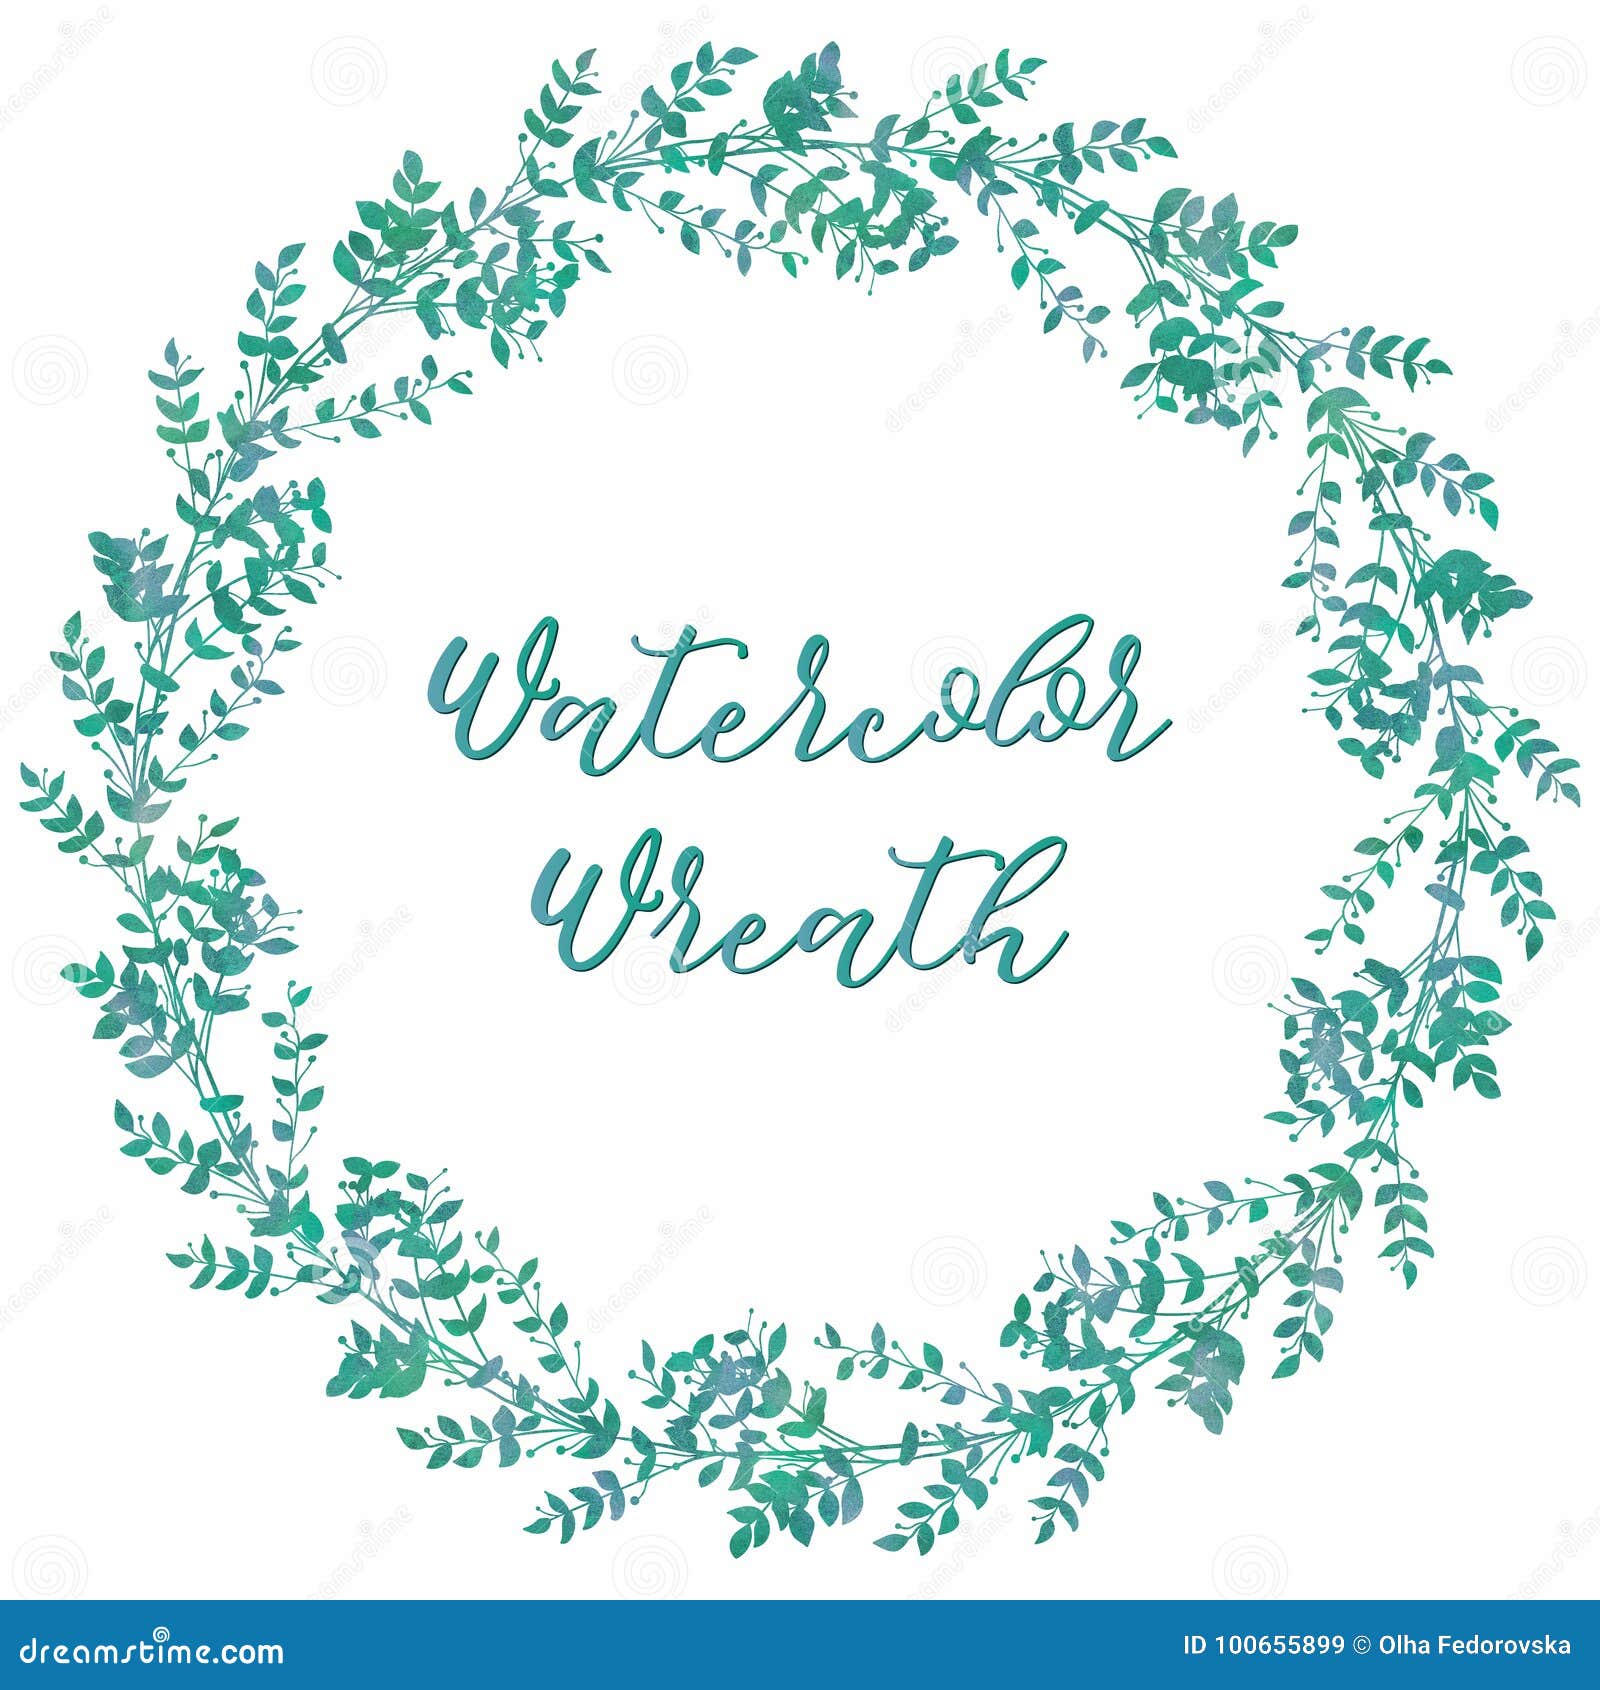 Download Drawn Watercolor Greenery Wreath Vector Illustration Stock Vector - Illustration of greenery ...